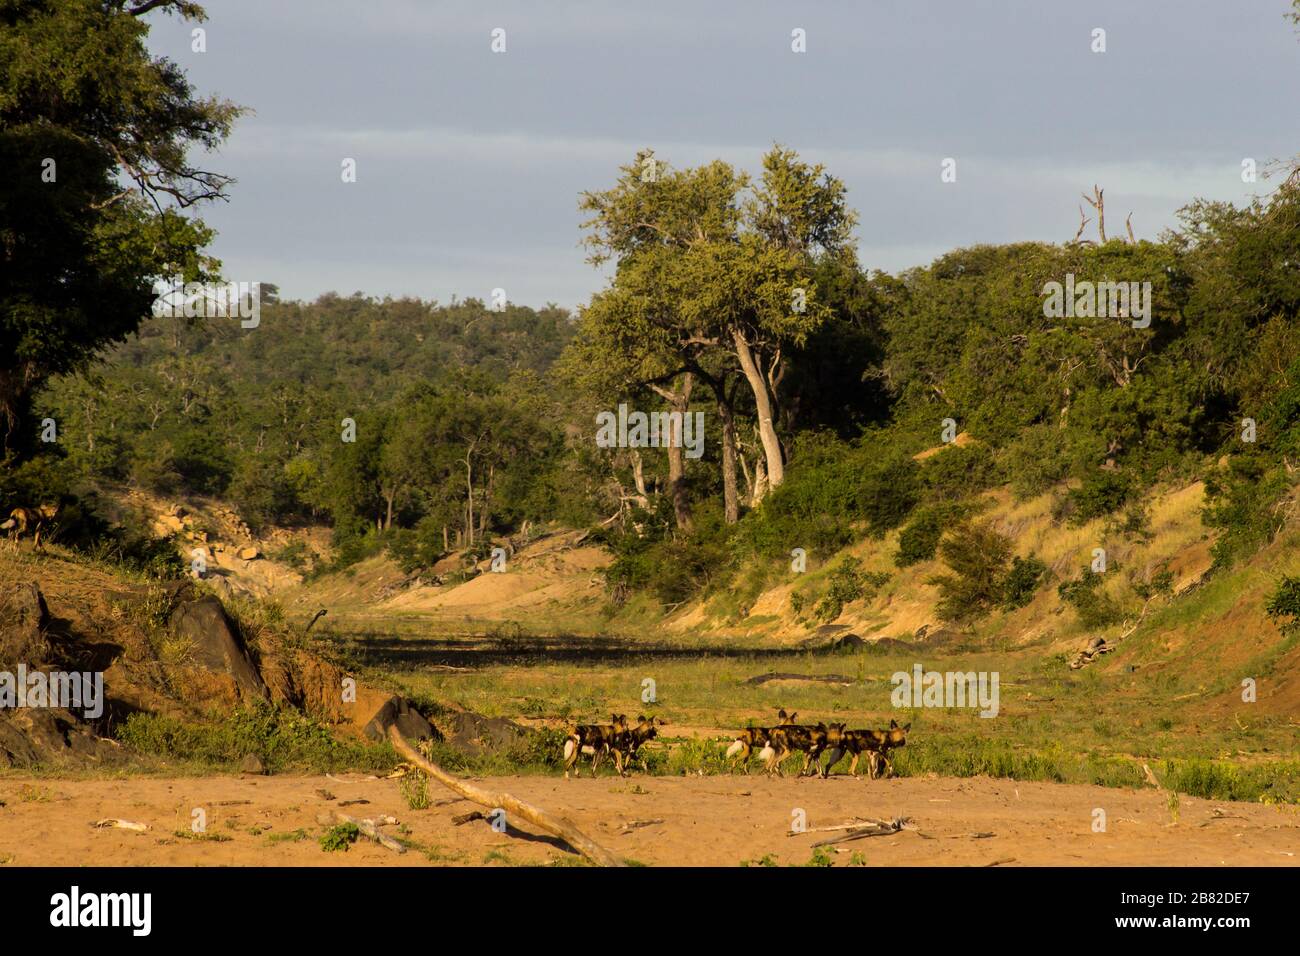 A small dried up river with a pack of African painted wolfs, Lycaon pictus, turning into it, in the Kruger National Park, South Africa Stock Photo